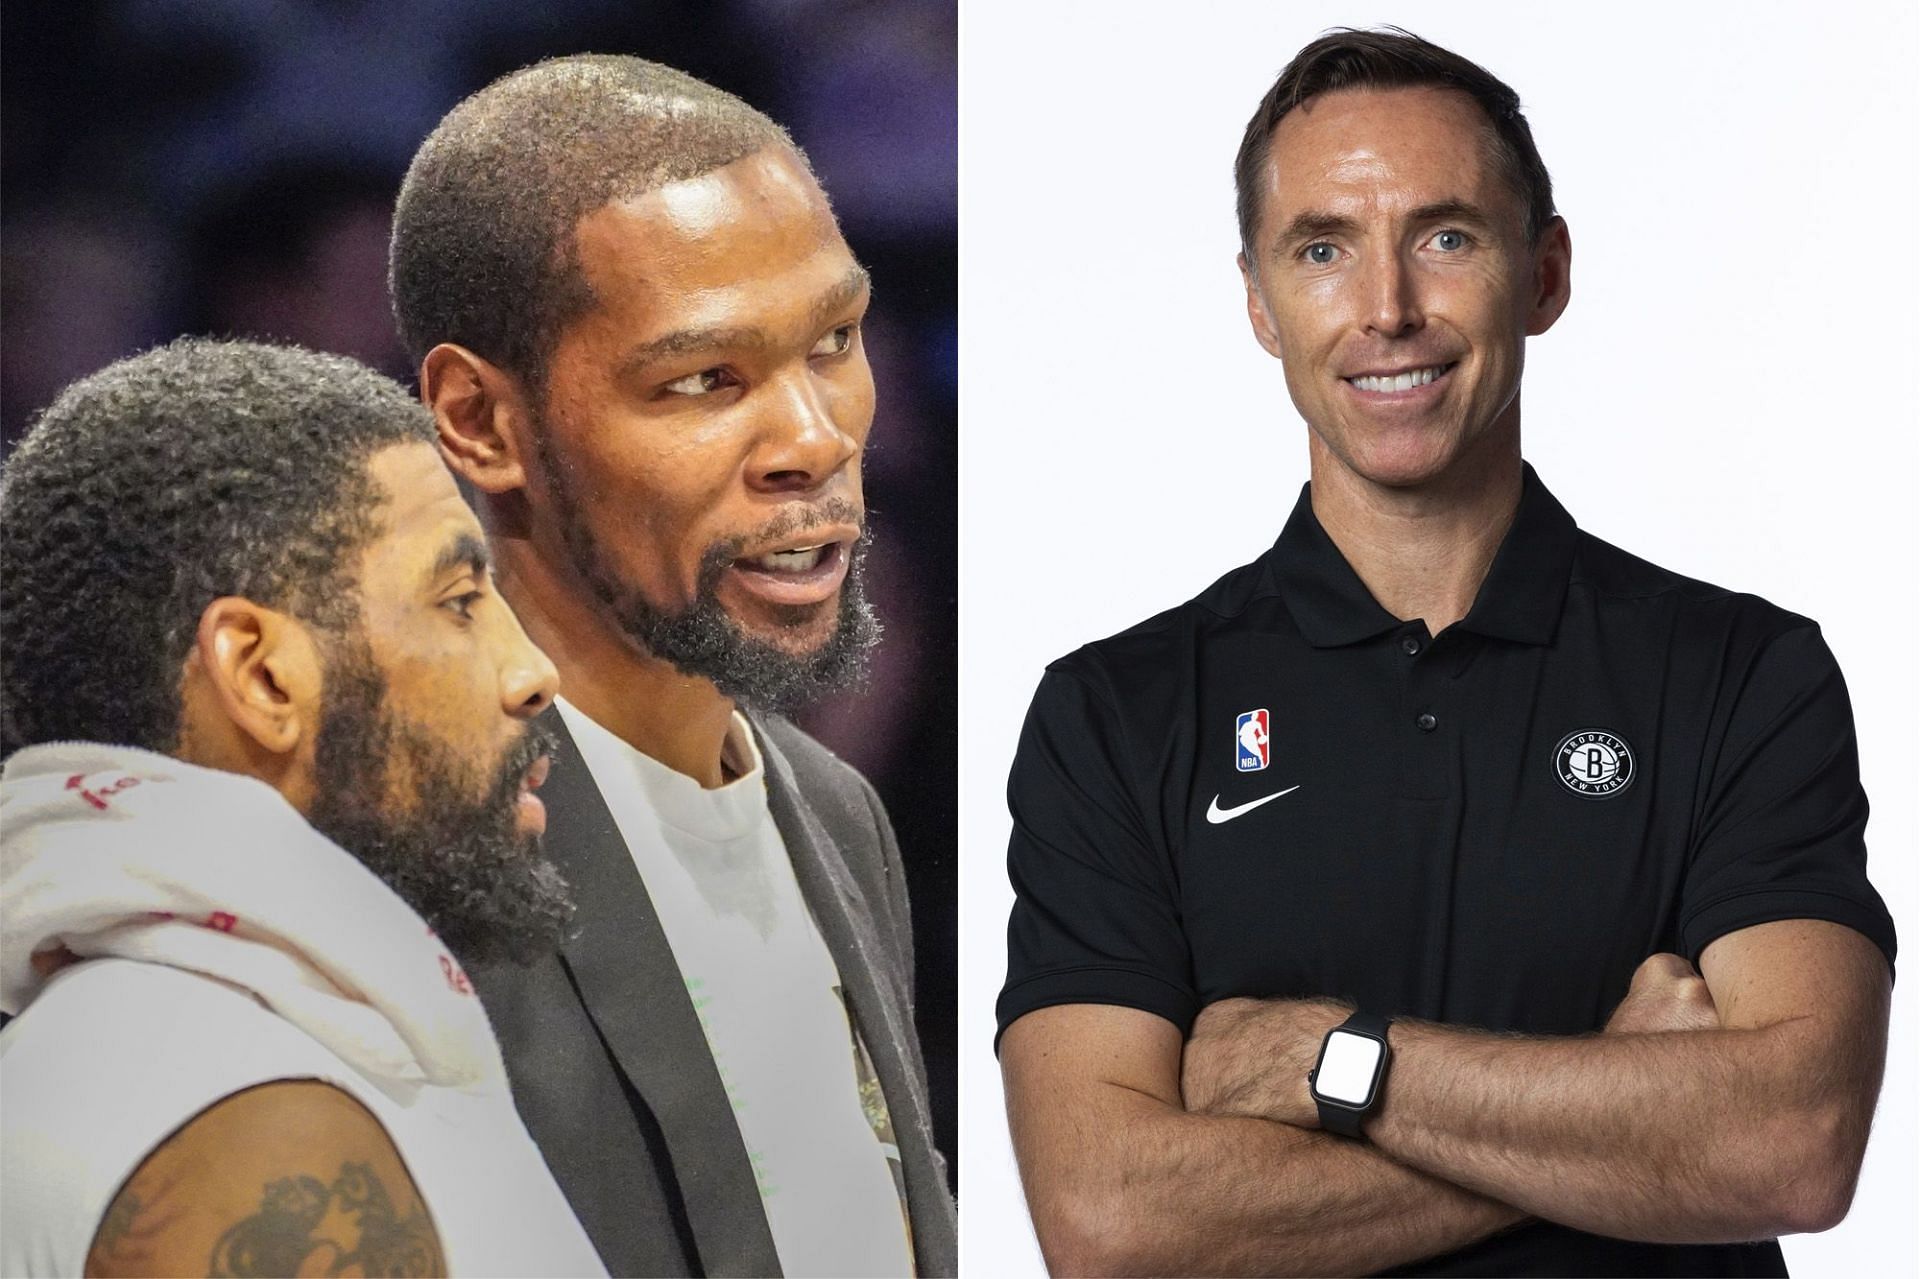 Kyrie Irving and Kevin Durant want Steve Nash back next season. [Photo: New York Post]